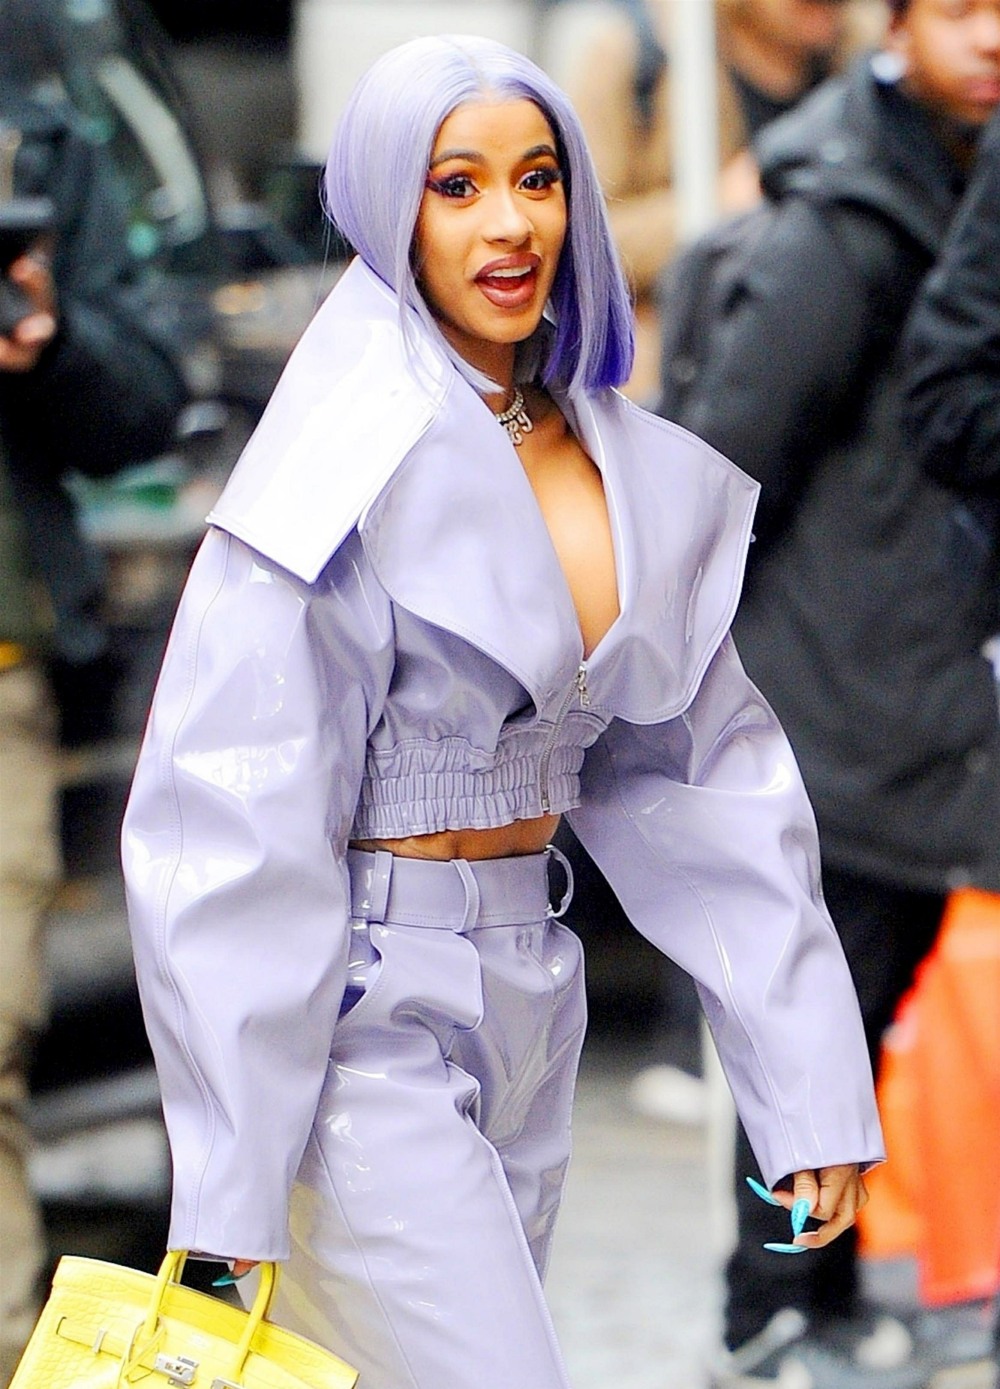 Cardi B heads out to run errands in a wild purple outfit